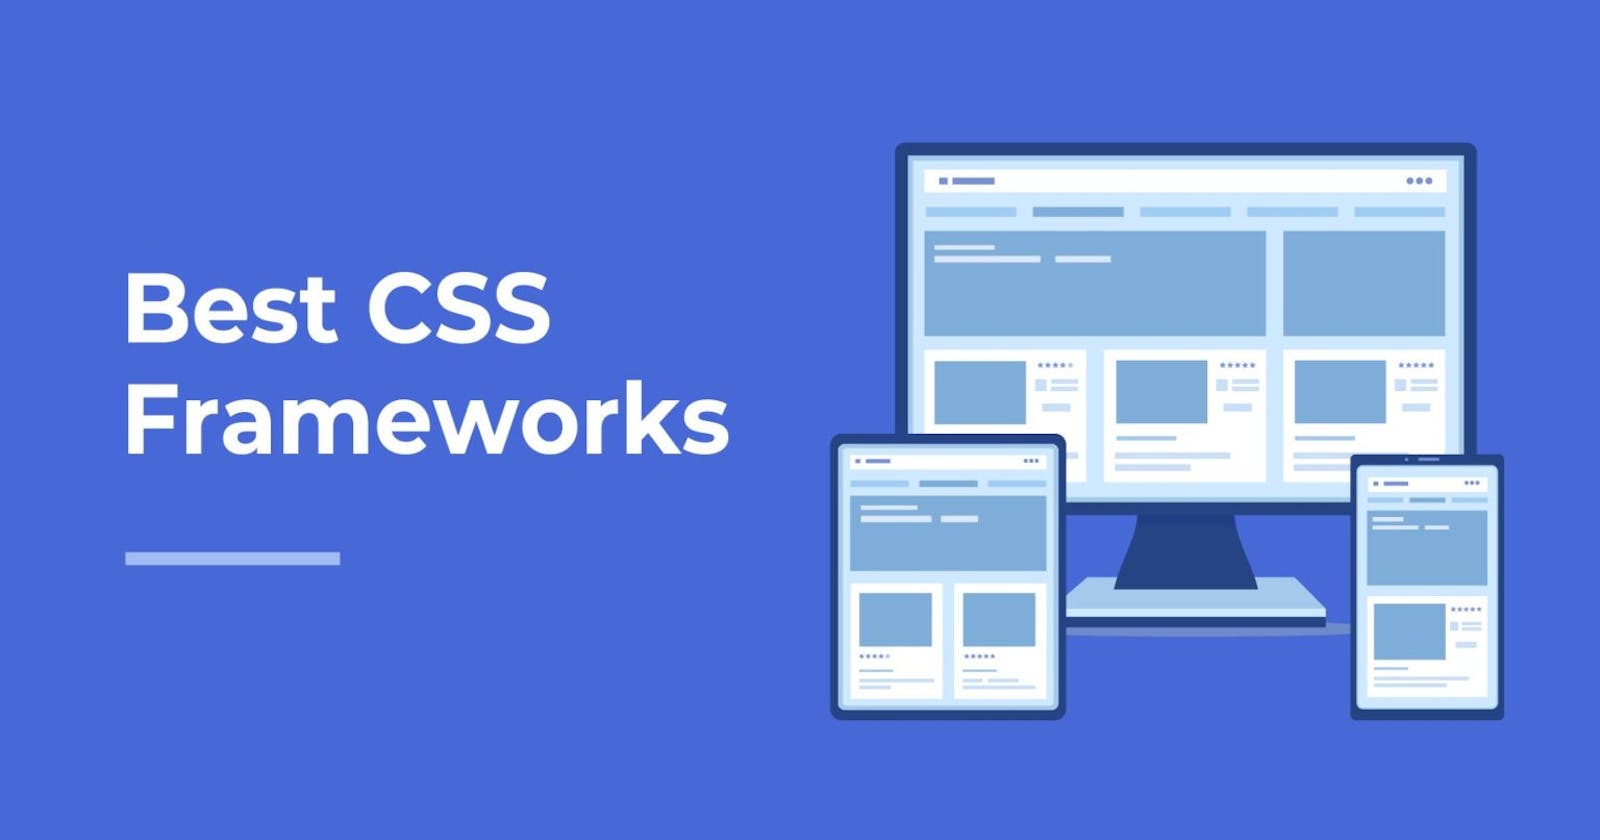 Top CSS Frameworks in 2022